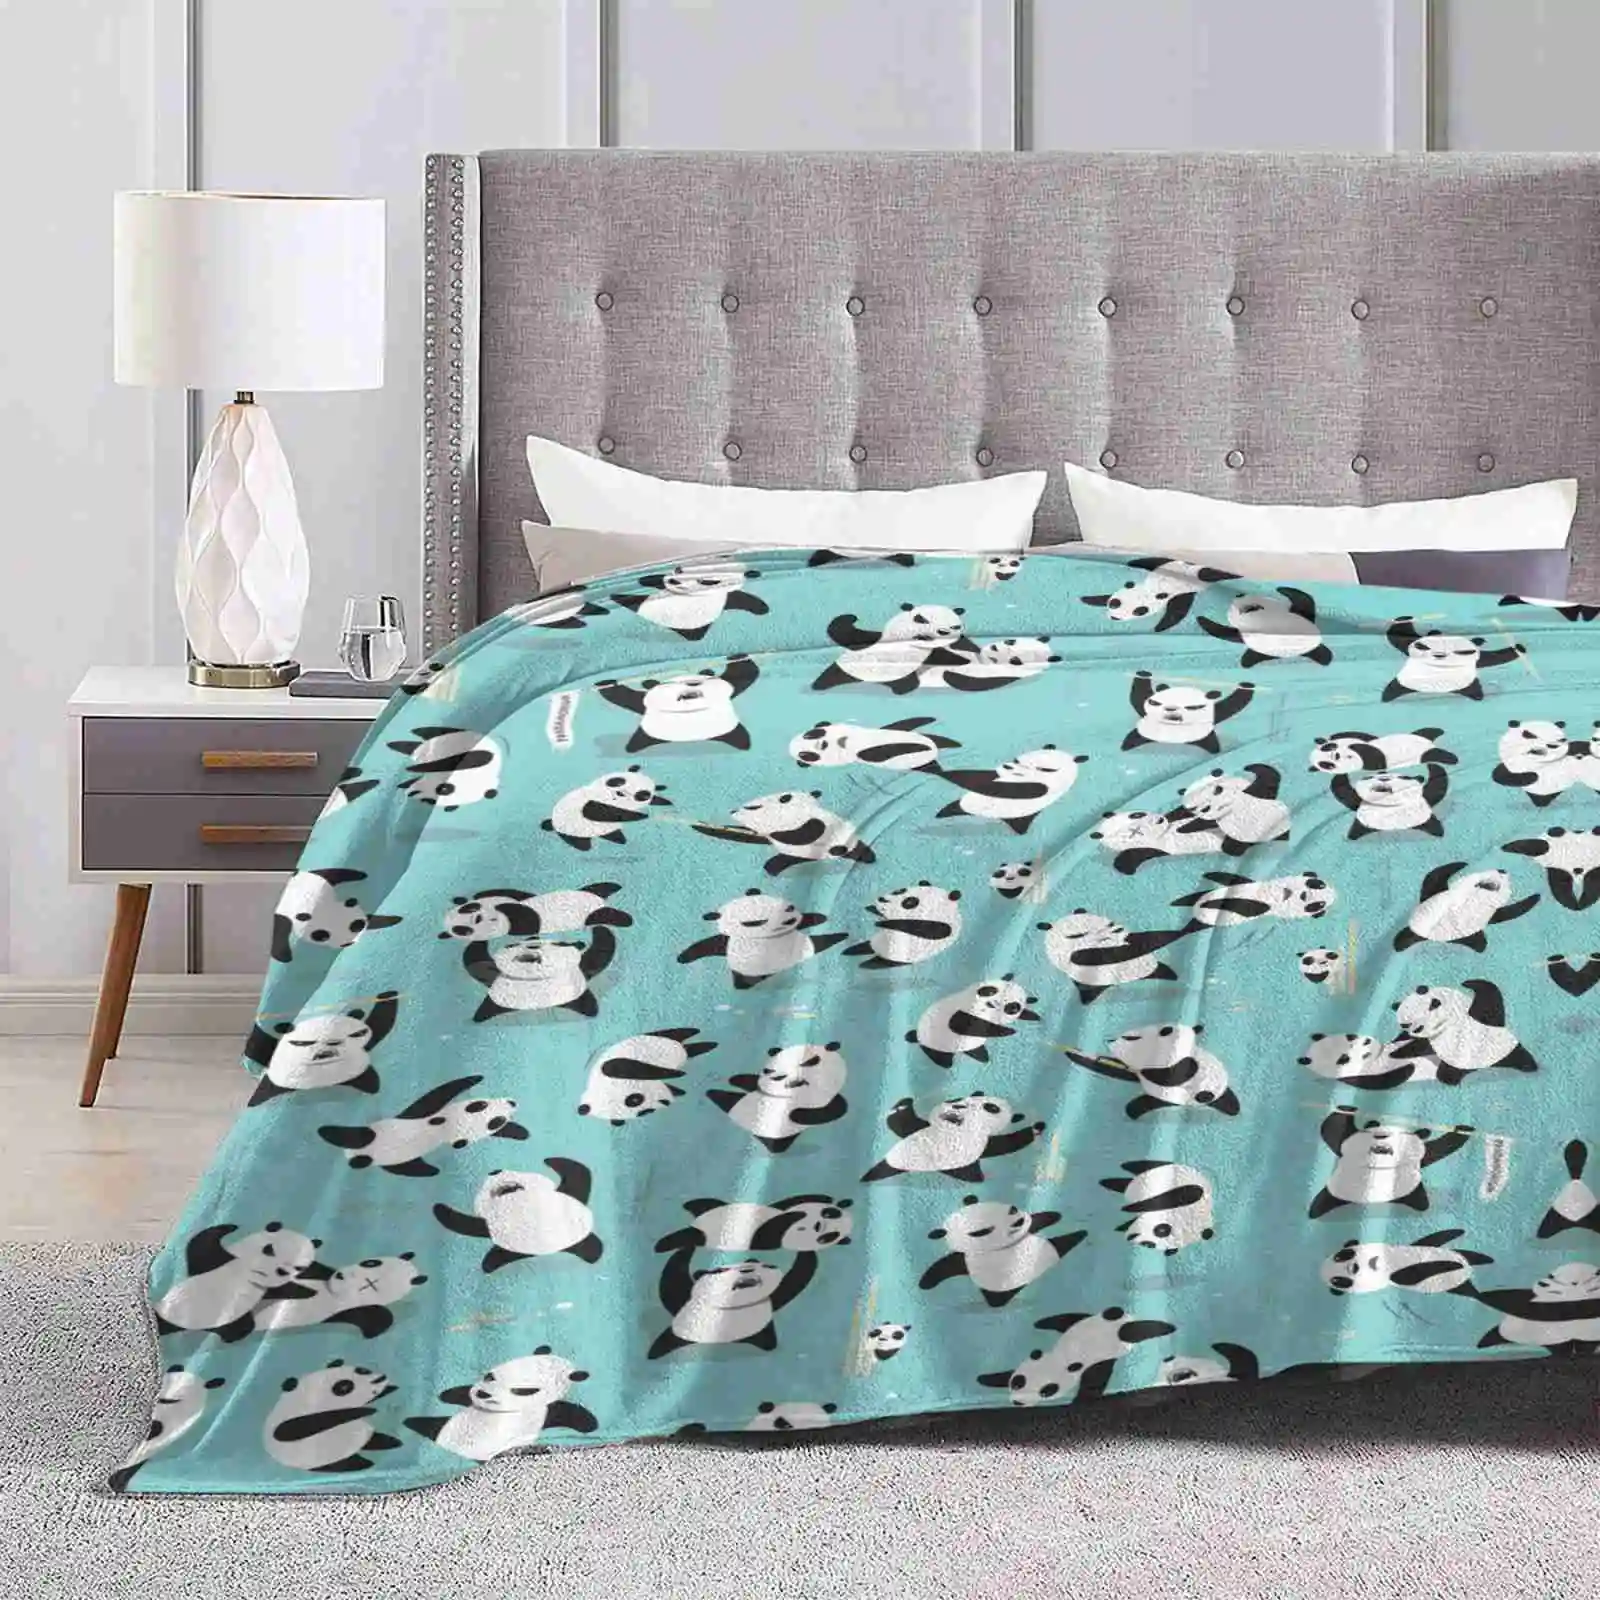 

Pandamonium Creative Design Comfortable Warm Flannel Blanket Pandas Funny Cute Vector Black And White Bears Comical Silly Crazy